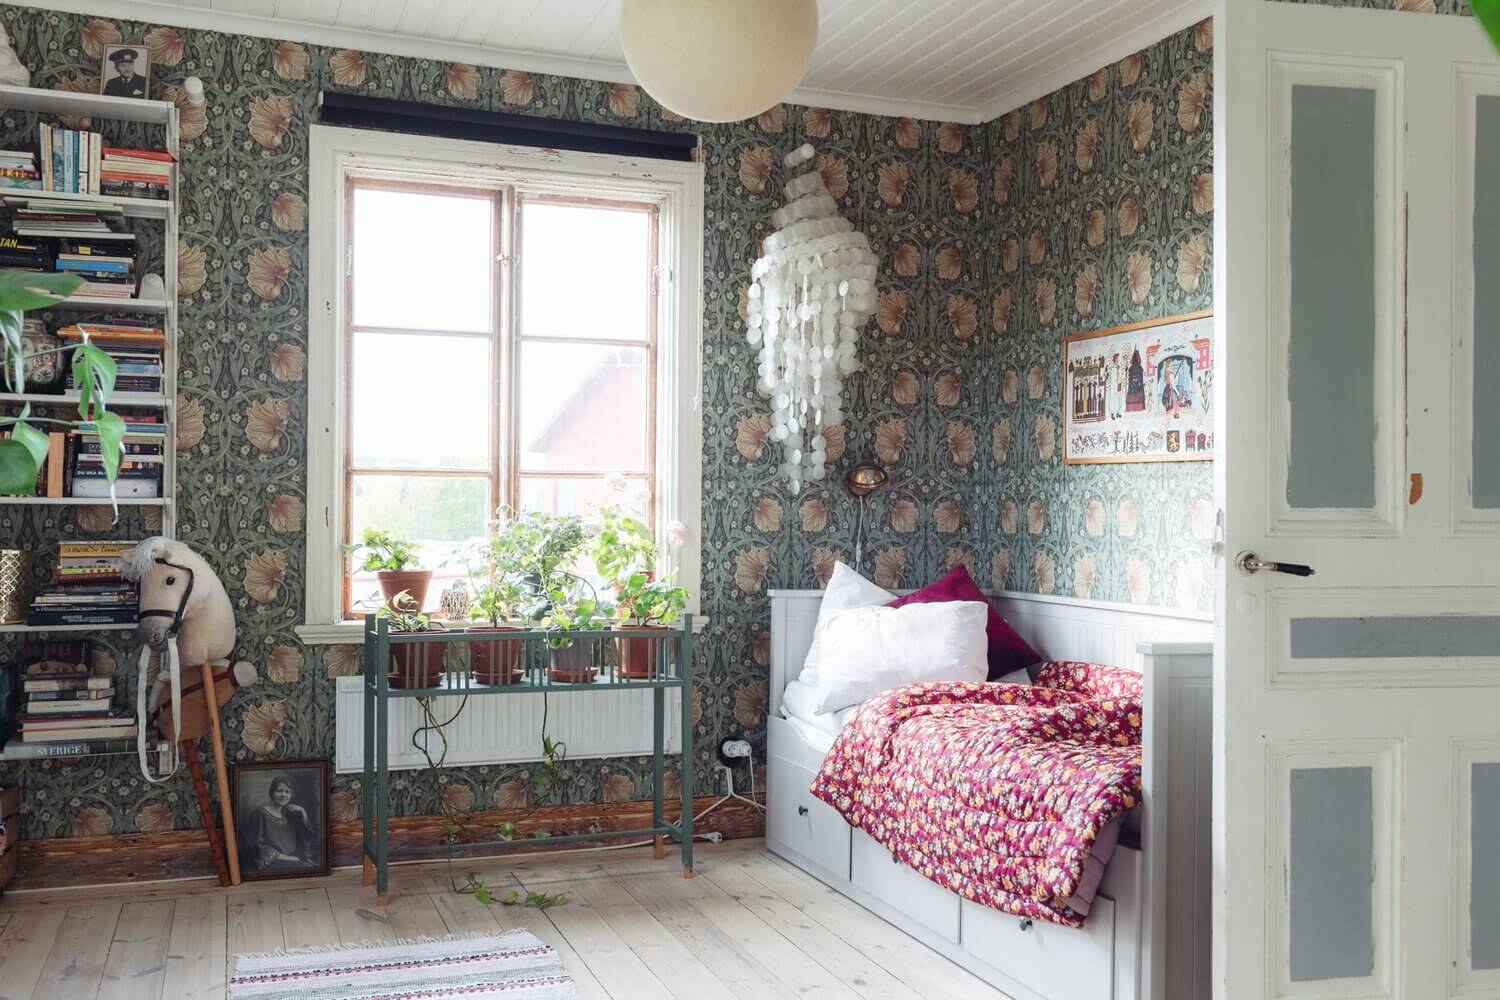 ACozyVintageLookForaTraditionalSwedishHome TheNordroom14 A Cozy Vintage Look For a Traditional Swedish Home